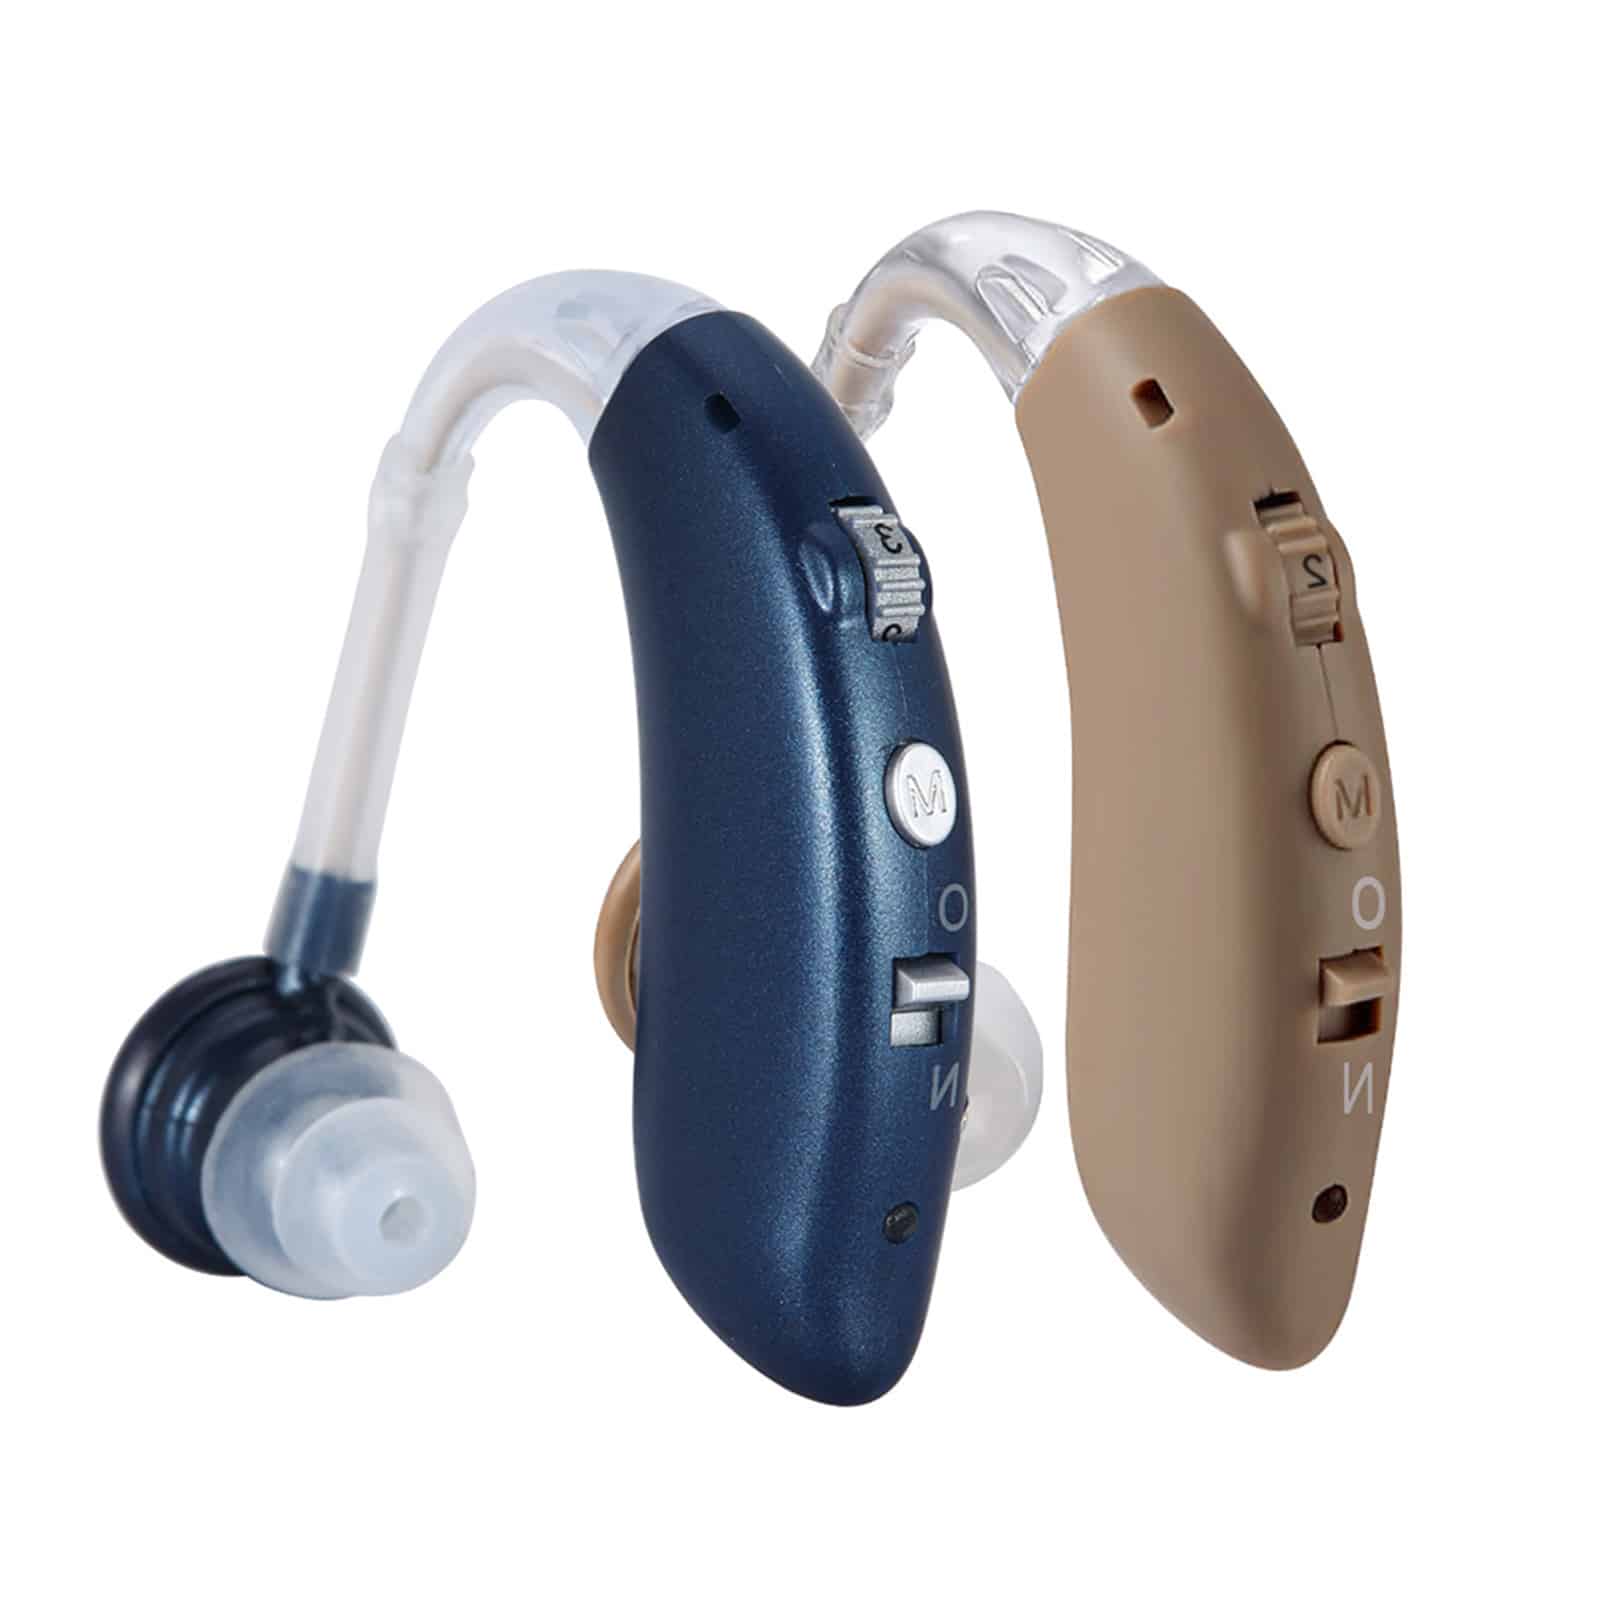 China Wholesale Wireless Digital Programmable Hearing Aids Medicare ...